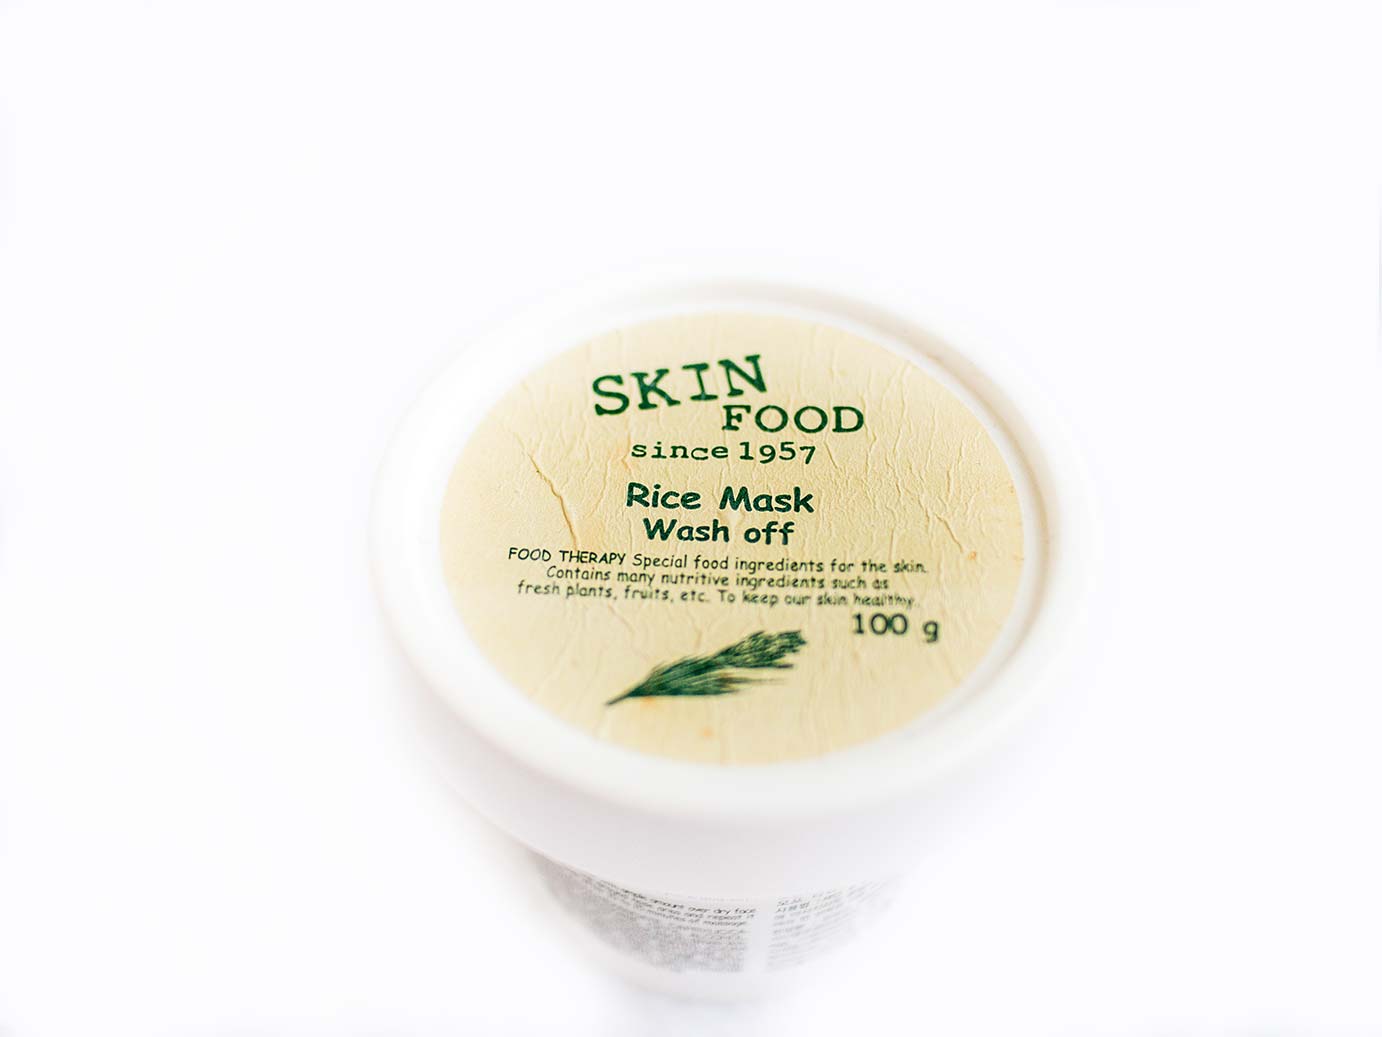 Skinfood rice mask review